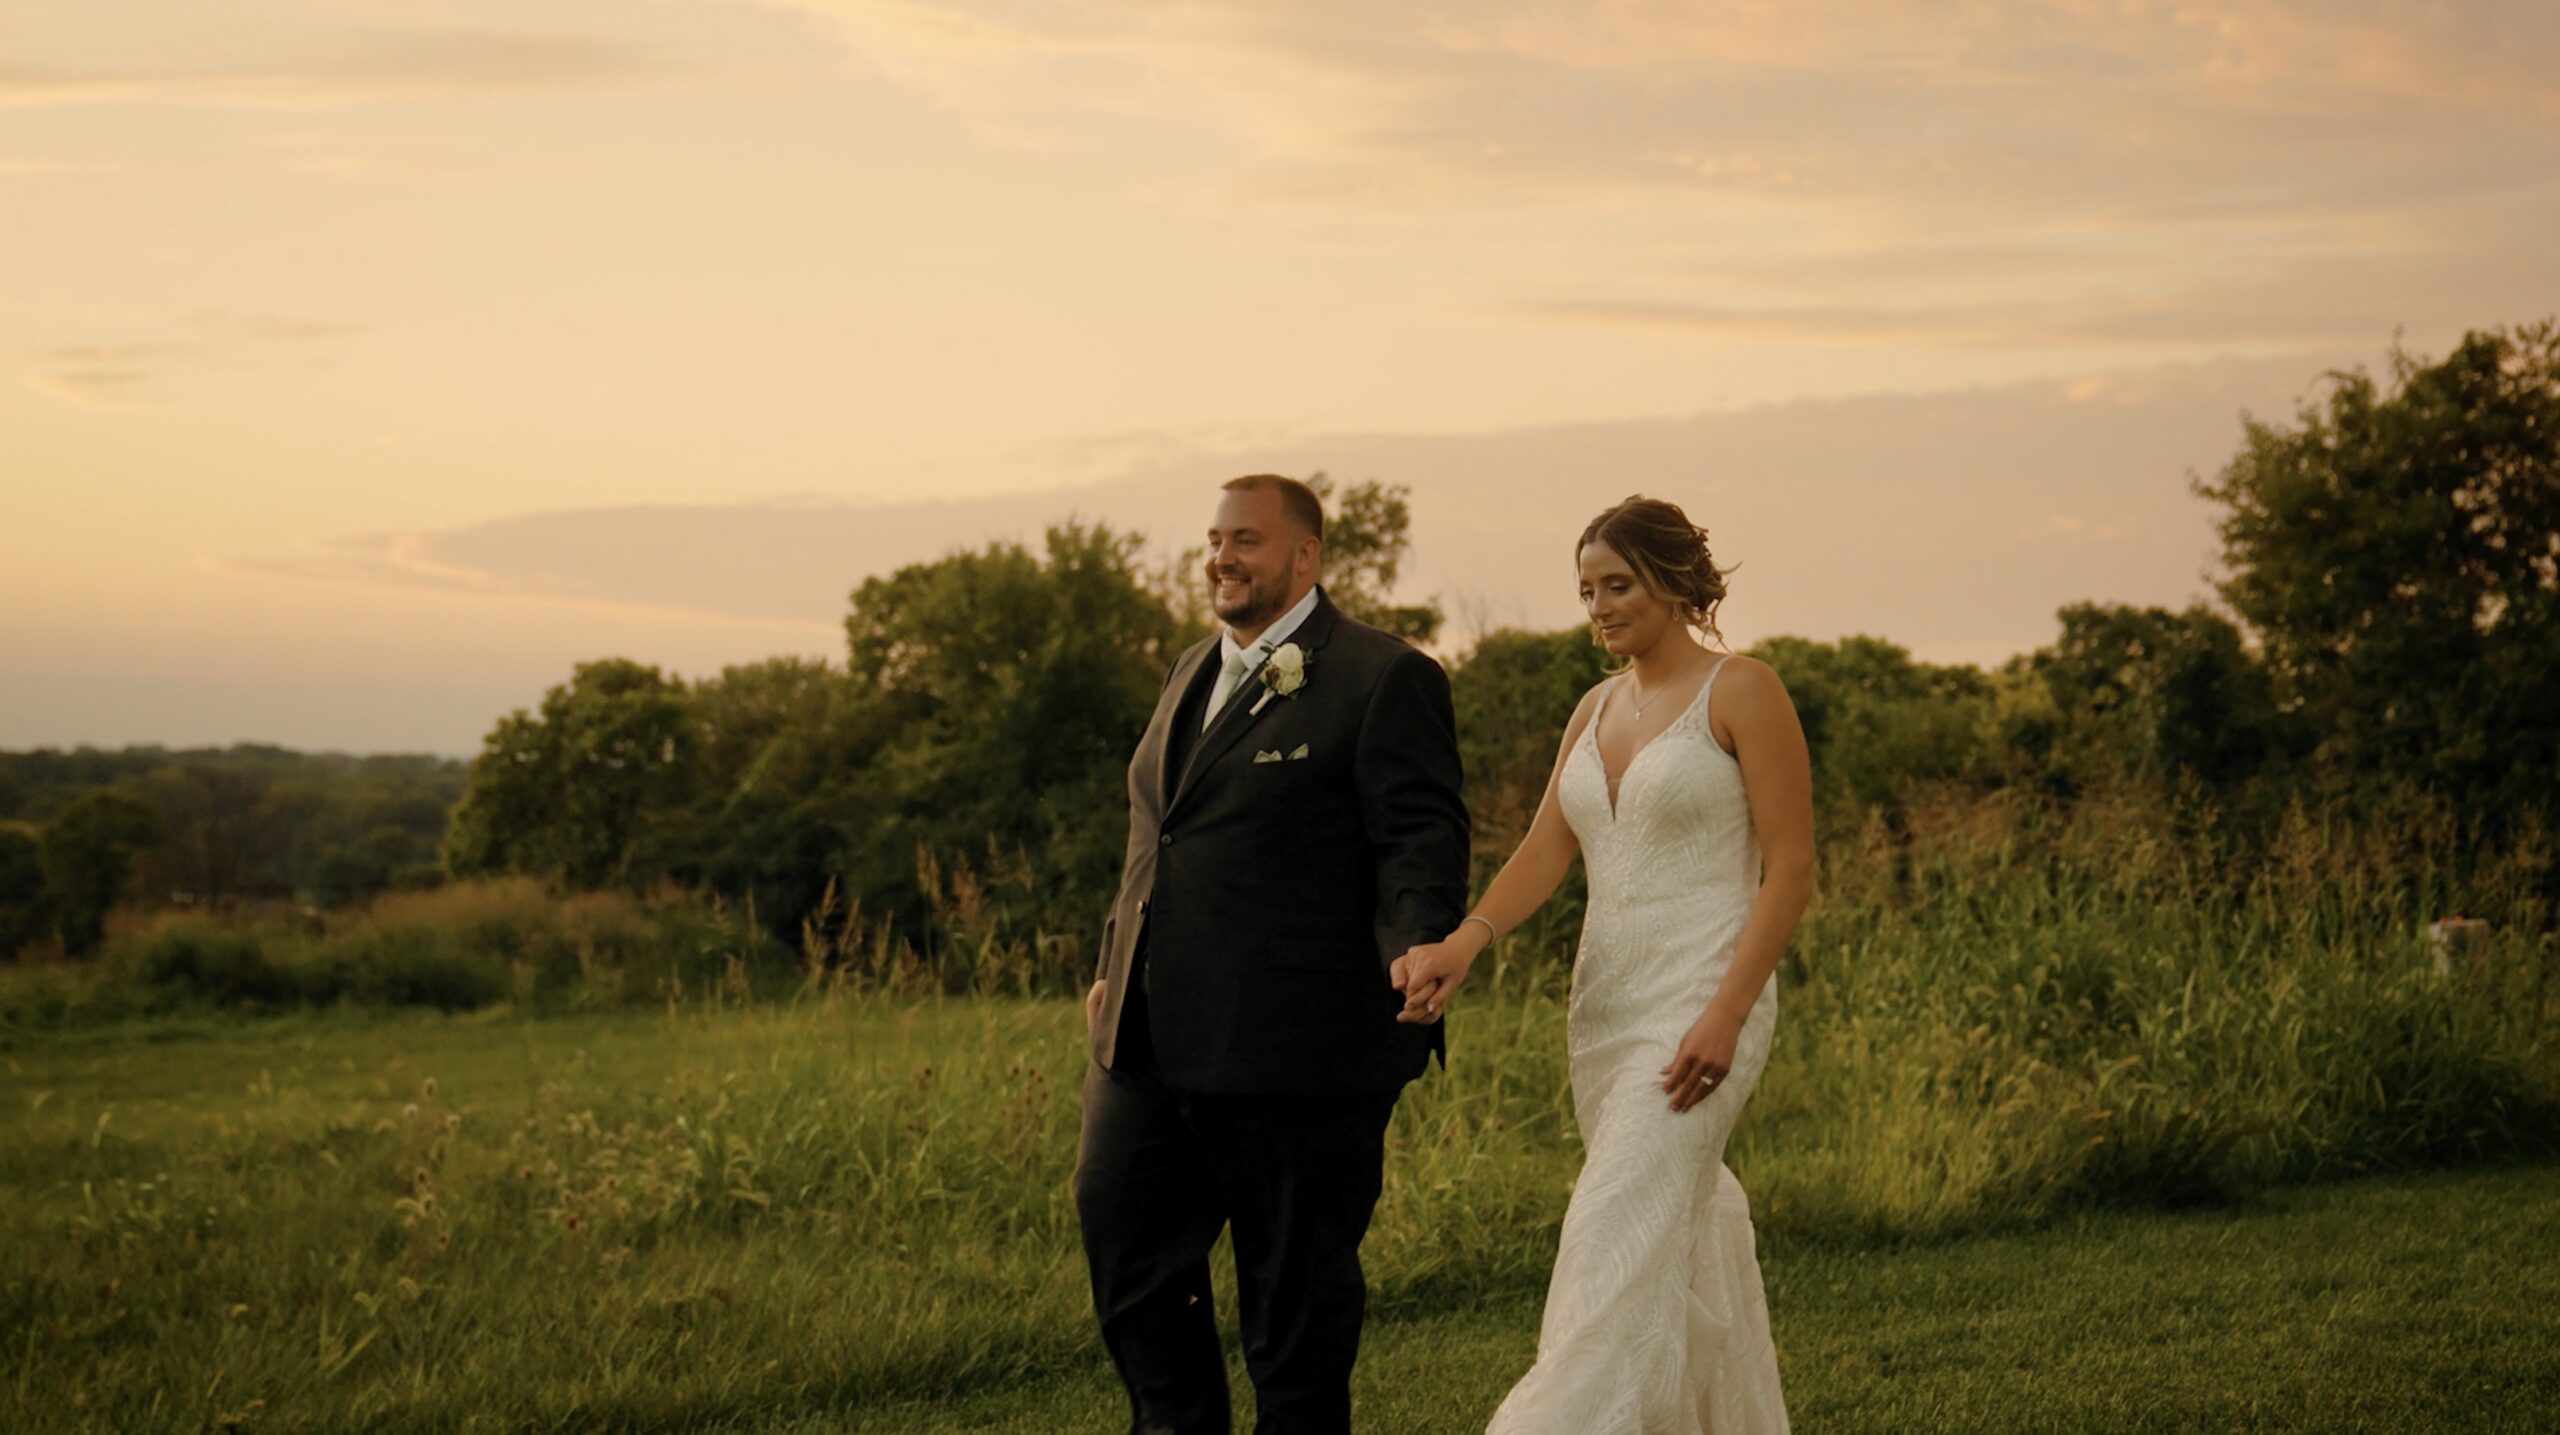 Bride and groom smiling while walking together holding hands at sunset in front of trees and tall grass